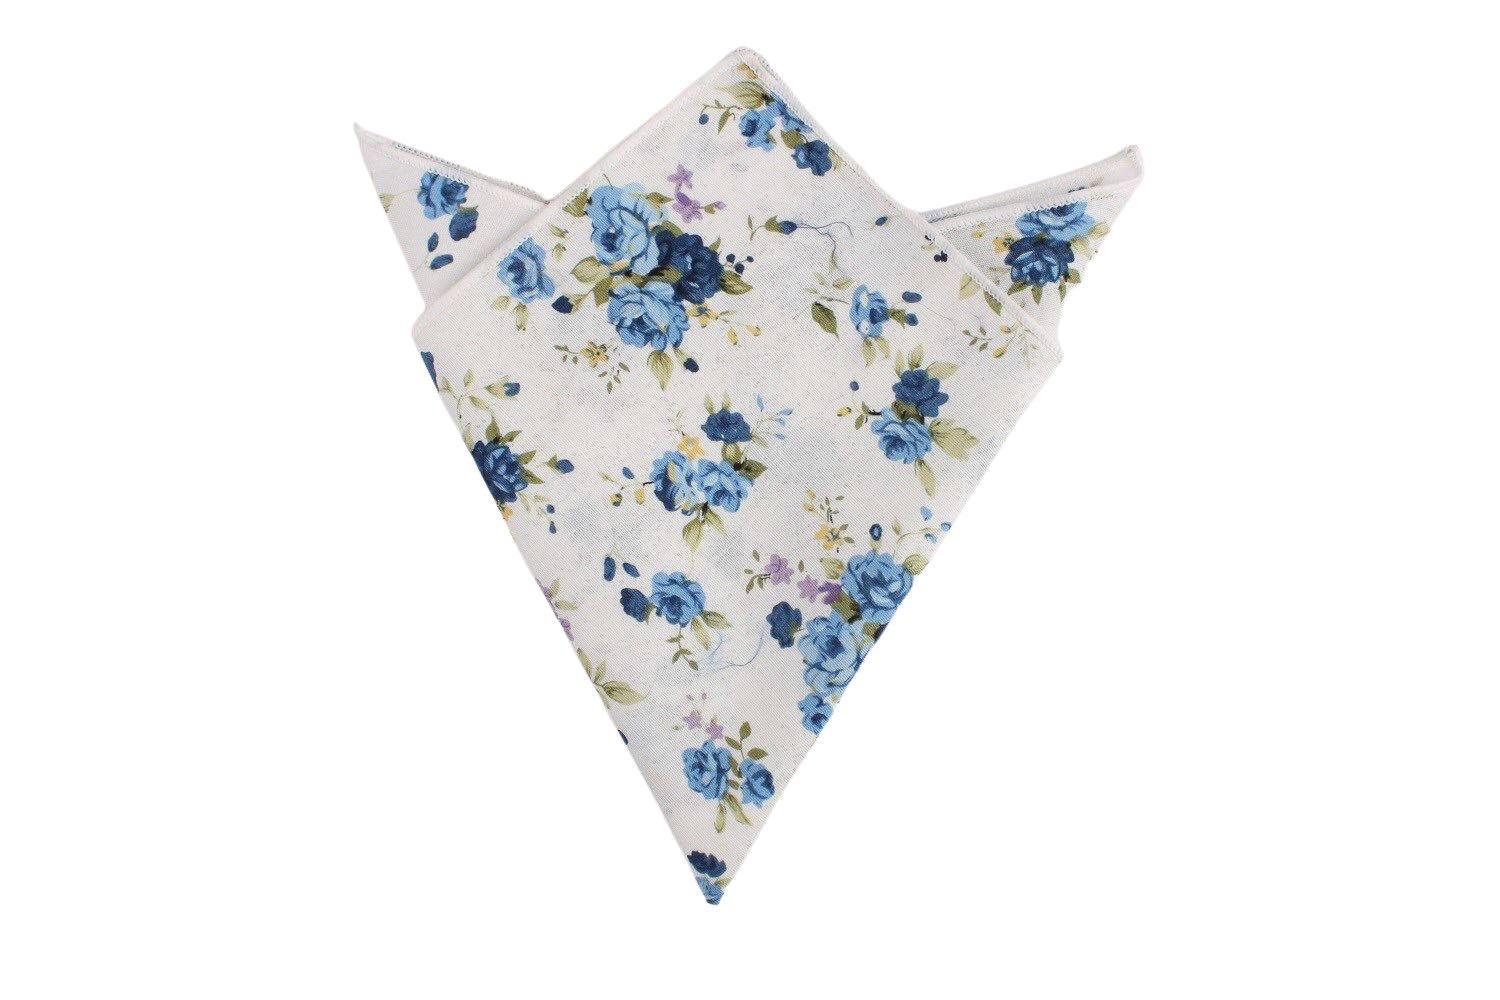 White Floral Pocket Square Mytieshop - SAGE Mytieshop White Floral Pocket SquareMaterial CottonItem Length: 23 cm ( 9 inches)Item Width : 22 cm (8.6 inches) The epitome of sophisticated style, this white floral pocket square is perfect for that sharp dressed man. Whether you&#39;re accessorizing for a wedding, a formal event, or just for work, this pocket square is sure to elevate your look. The delicate florals are understated and elegant, and the pocket square itself is made of high-quality fabric